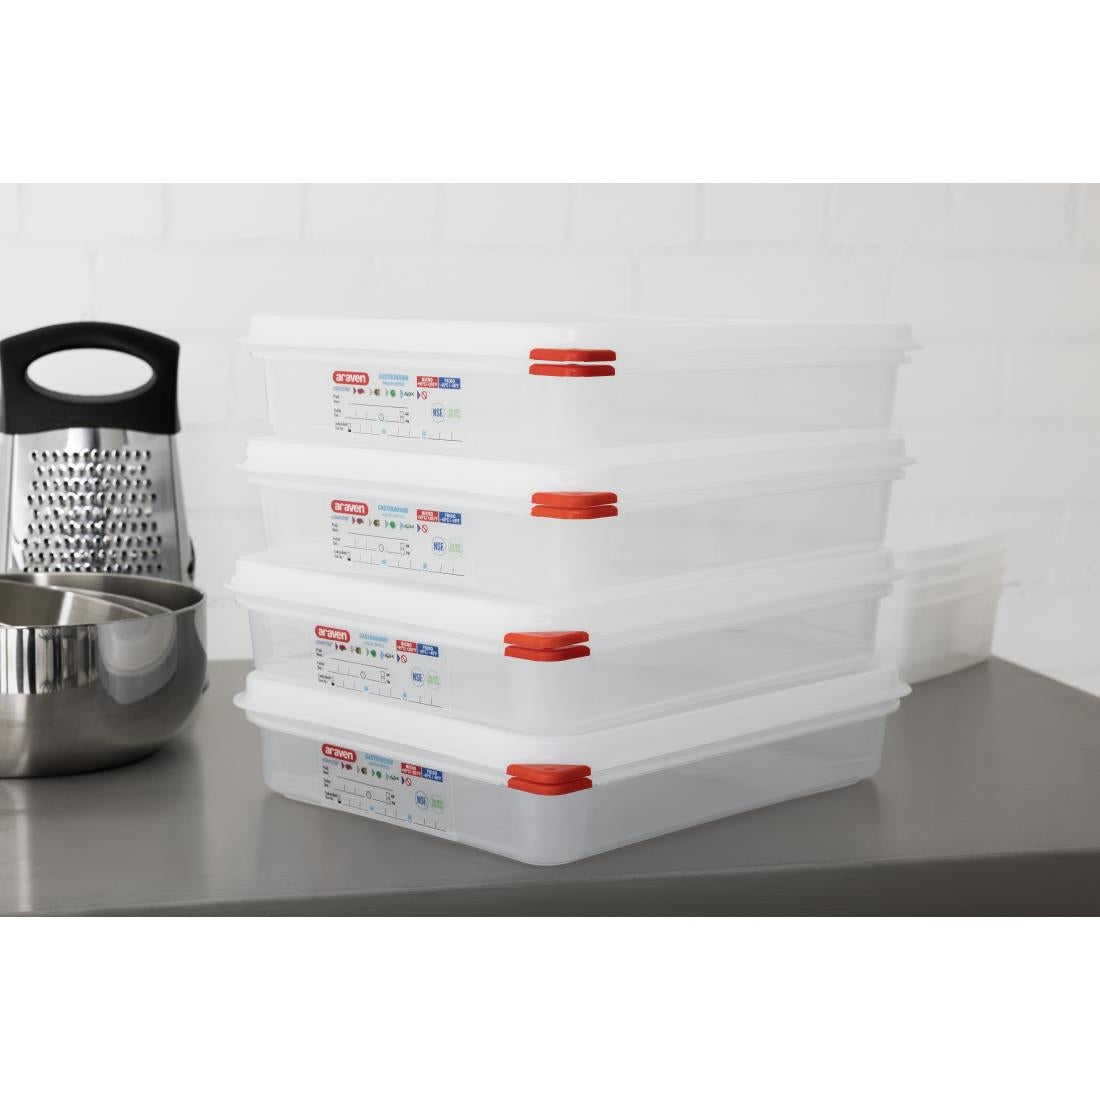 Araven Polypropylene 1/2 Gastronorm Food Containers 4L (Pack of 4) JD Catering Equipment Solutions Ltd